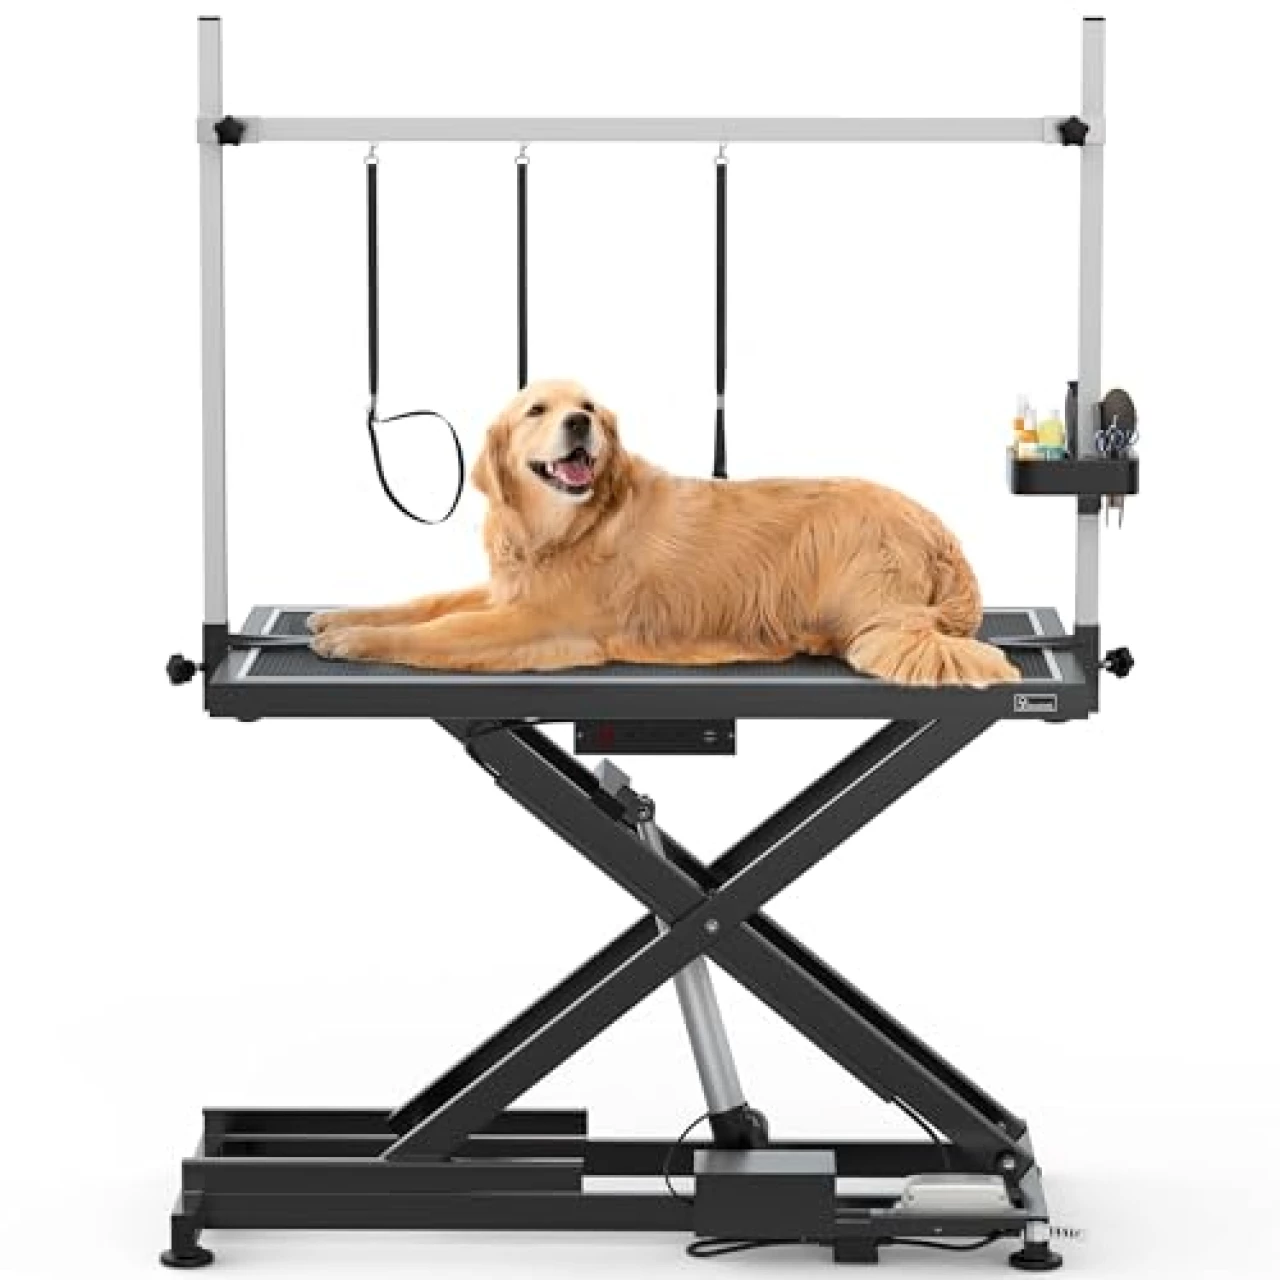 YITAHOME Professional Electric Dog Grooming Table for Large Dogs Heavy Duty Pet Grooming Table w/Aluminum Dog Grooming Arm, Anti Slip Tabletop &amp; Tool Organizer Pet Grooming Station 50&quot; Black